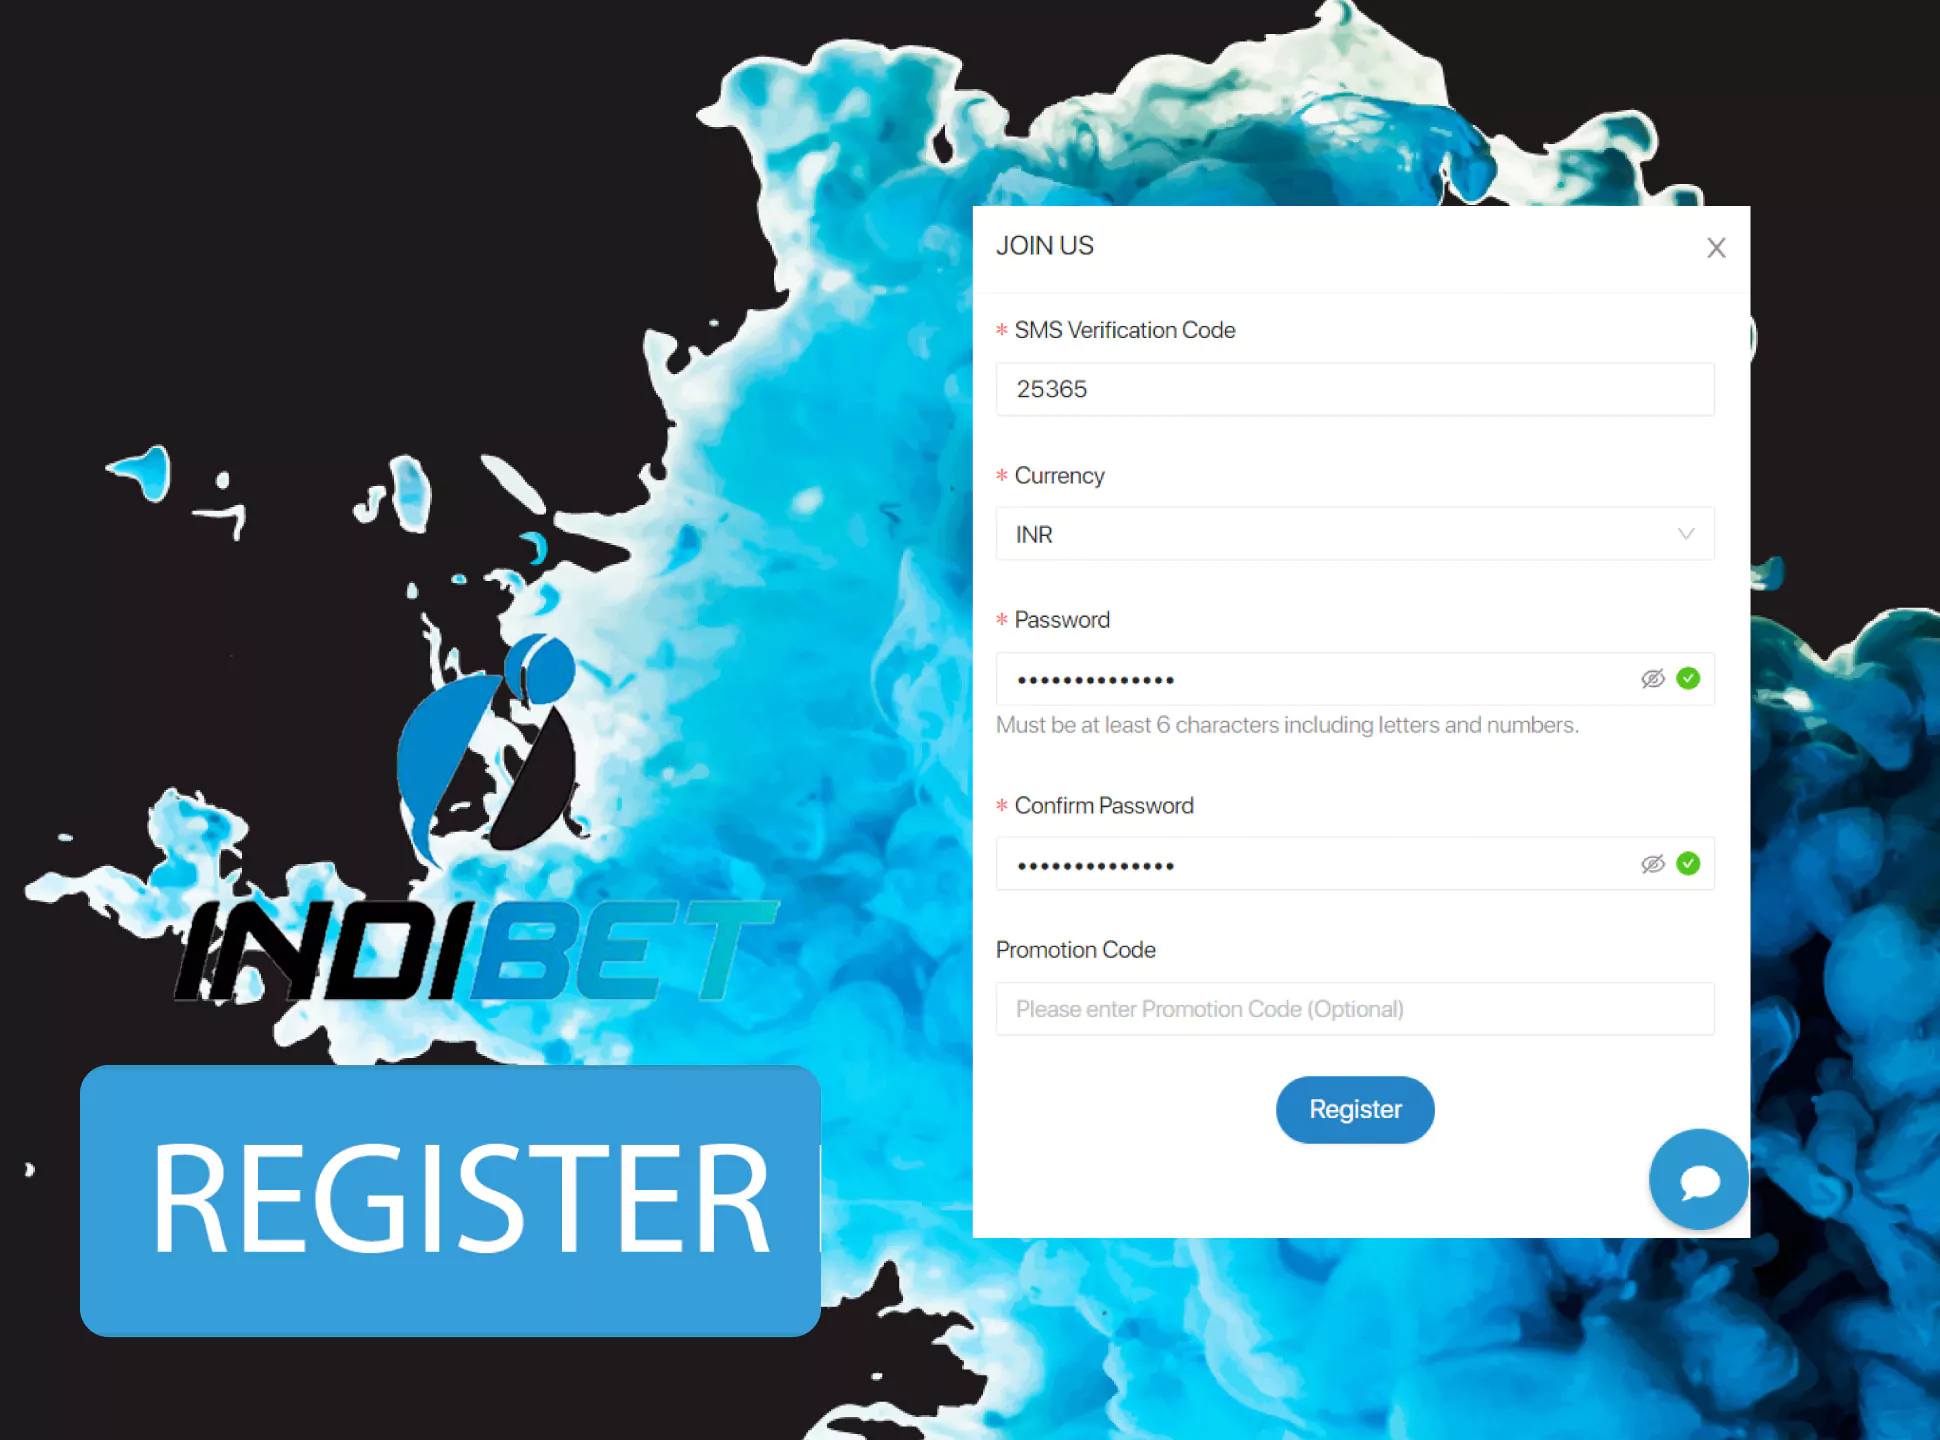 Click register button and finish registration at the Indibet.